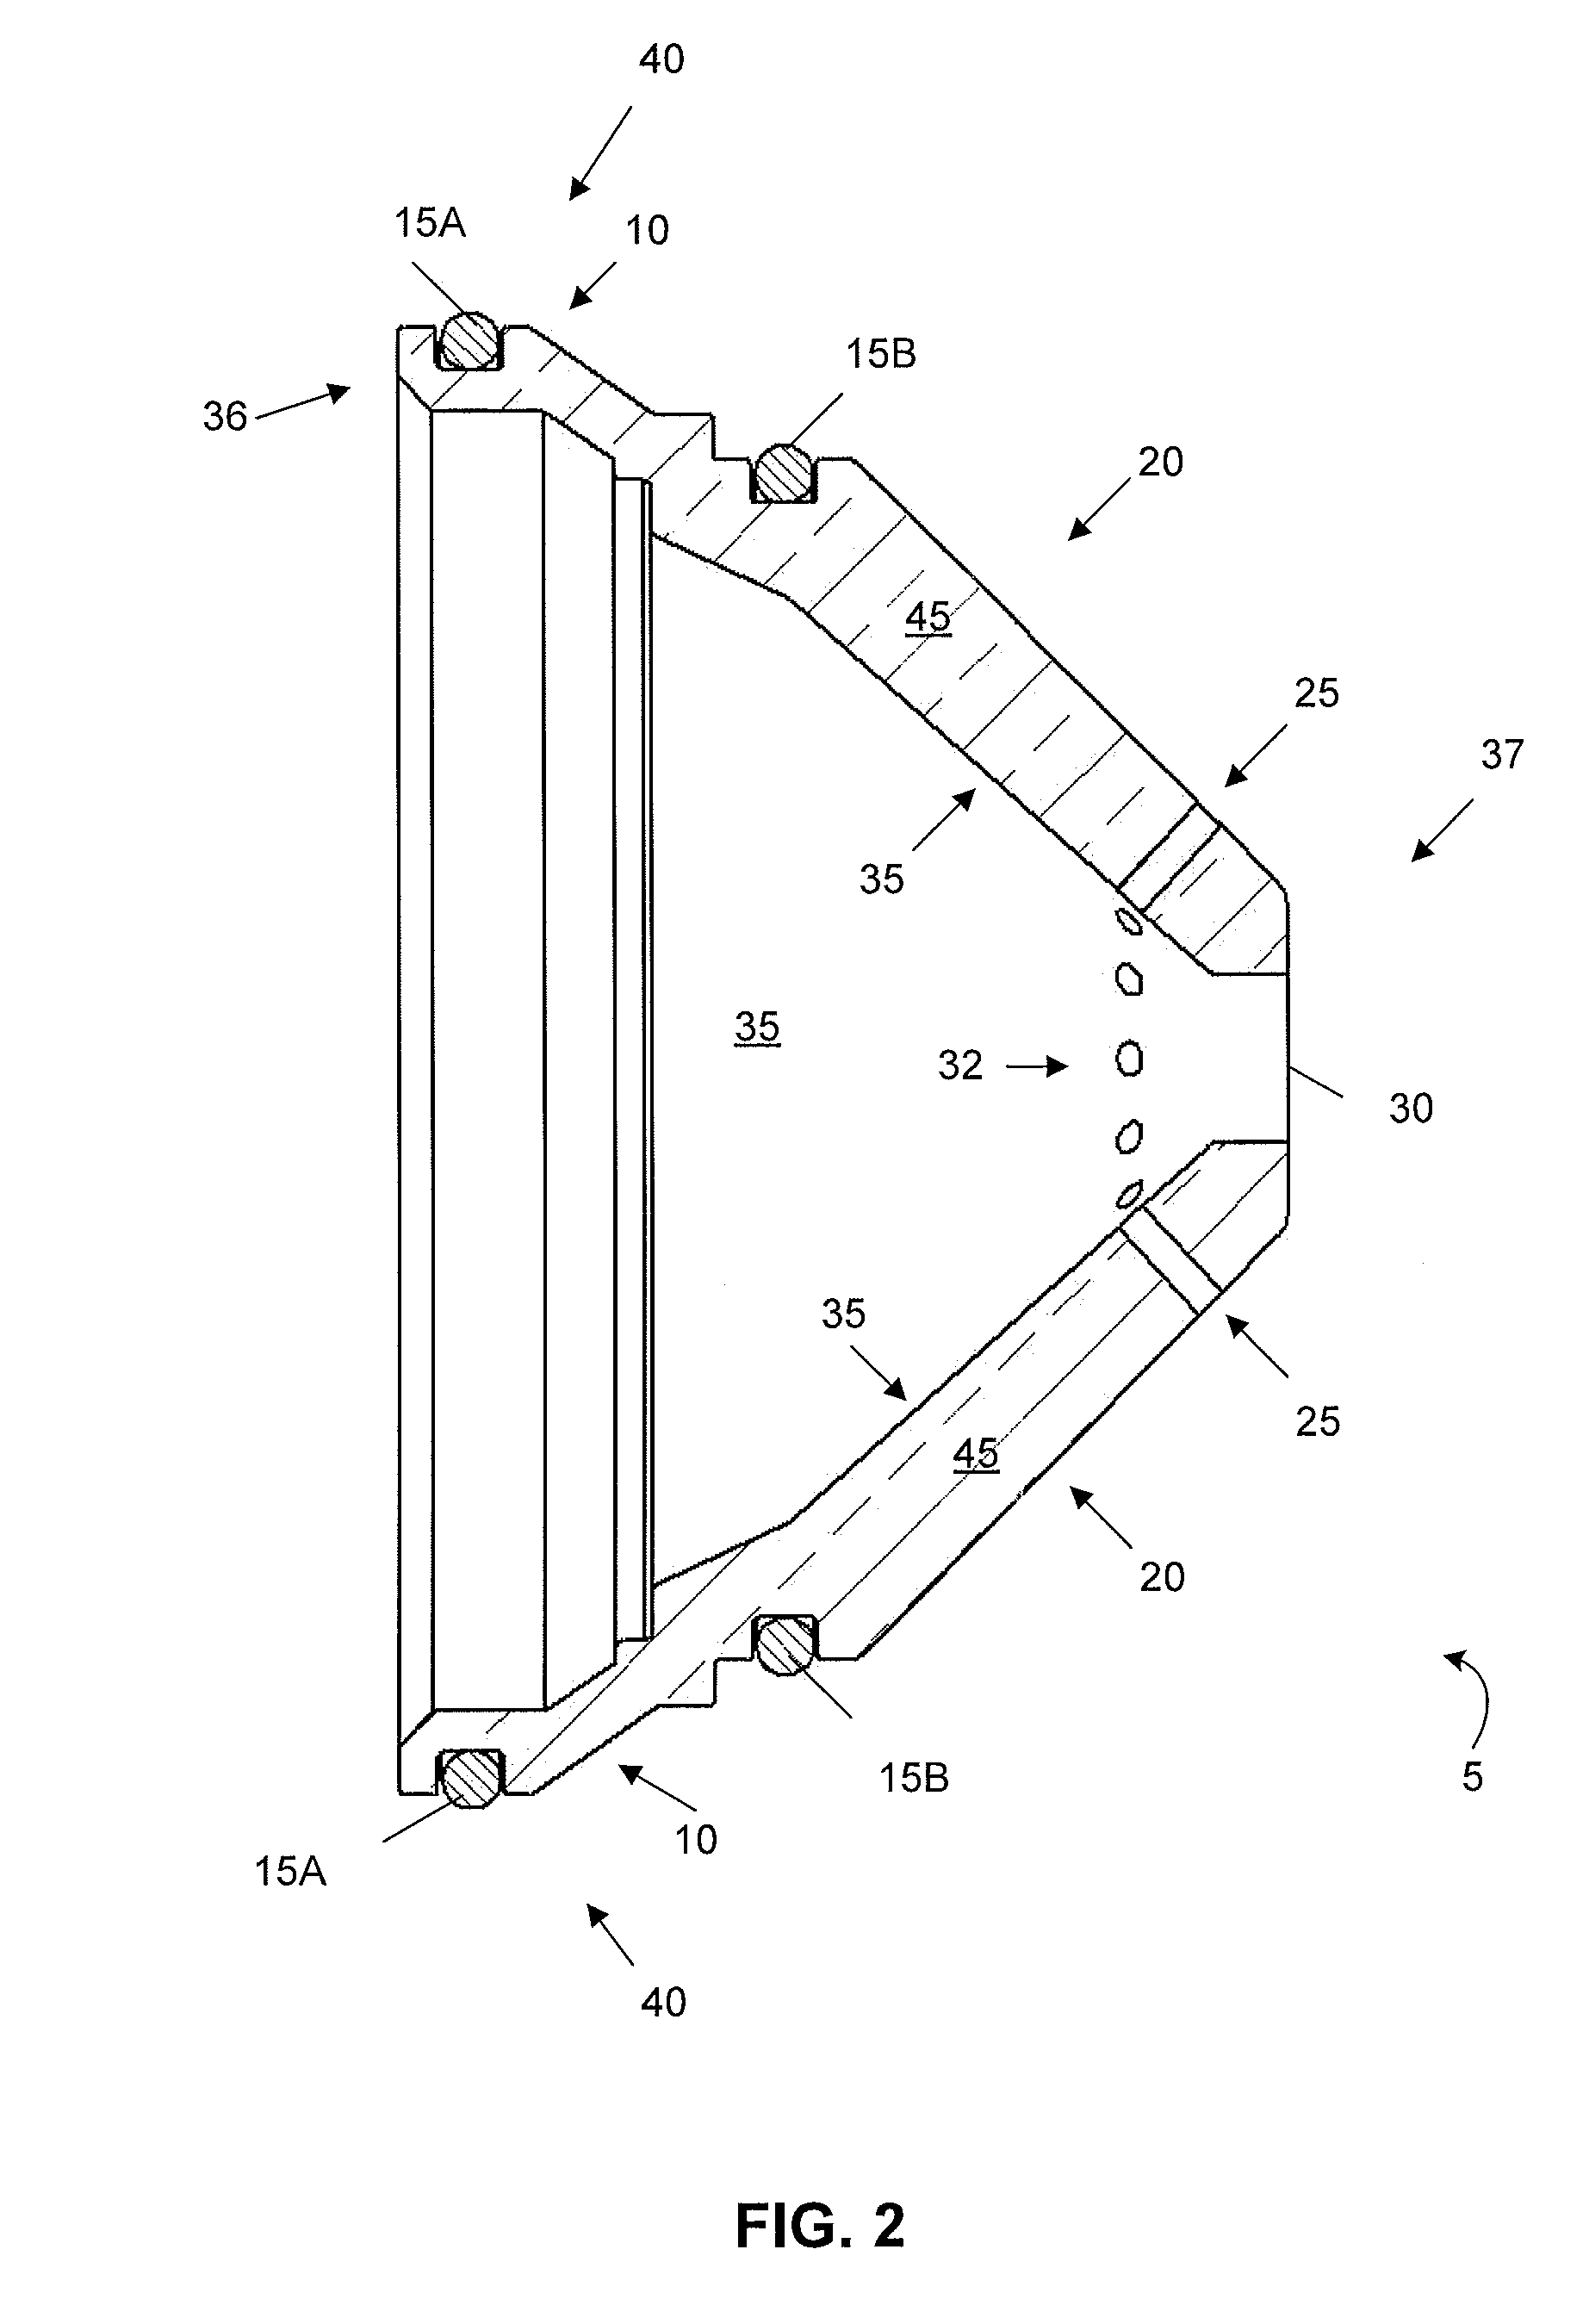 Apparatus and Method for a Liquid Cooled Shield for Improved Piercing Performance